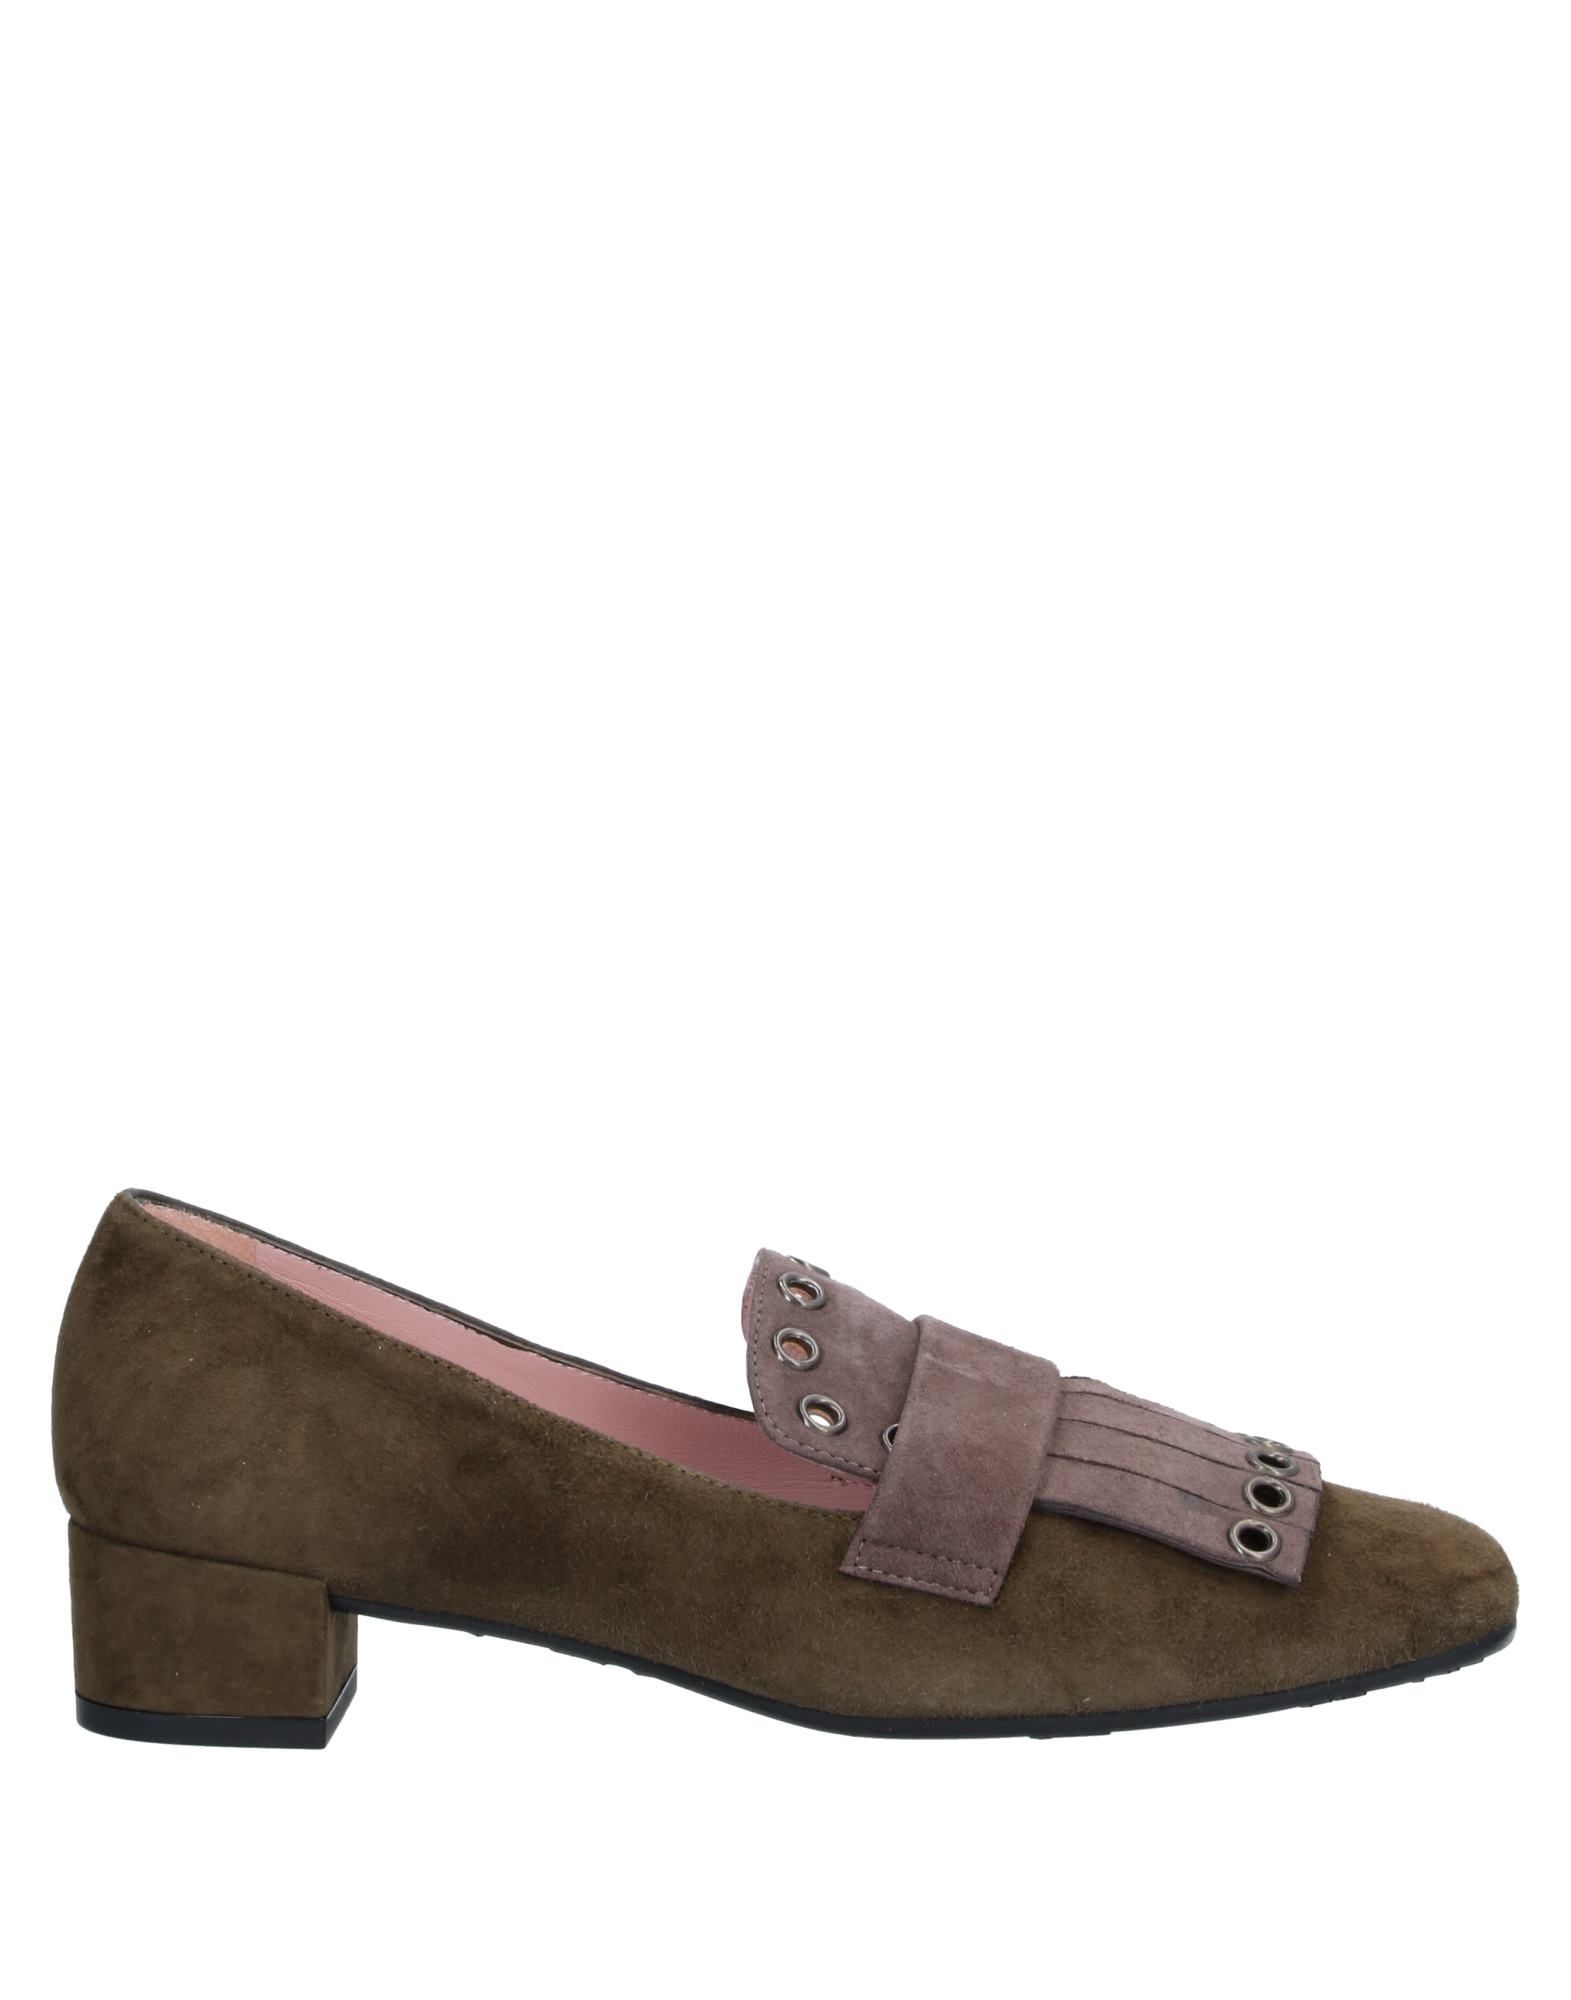 PRETTY BALLERINAS Loafers,11309571NP 10